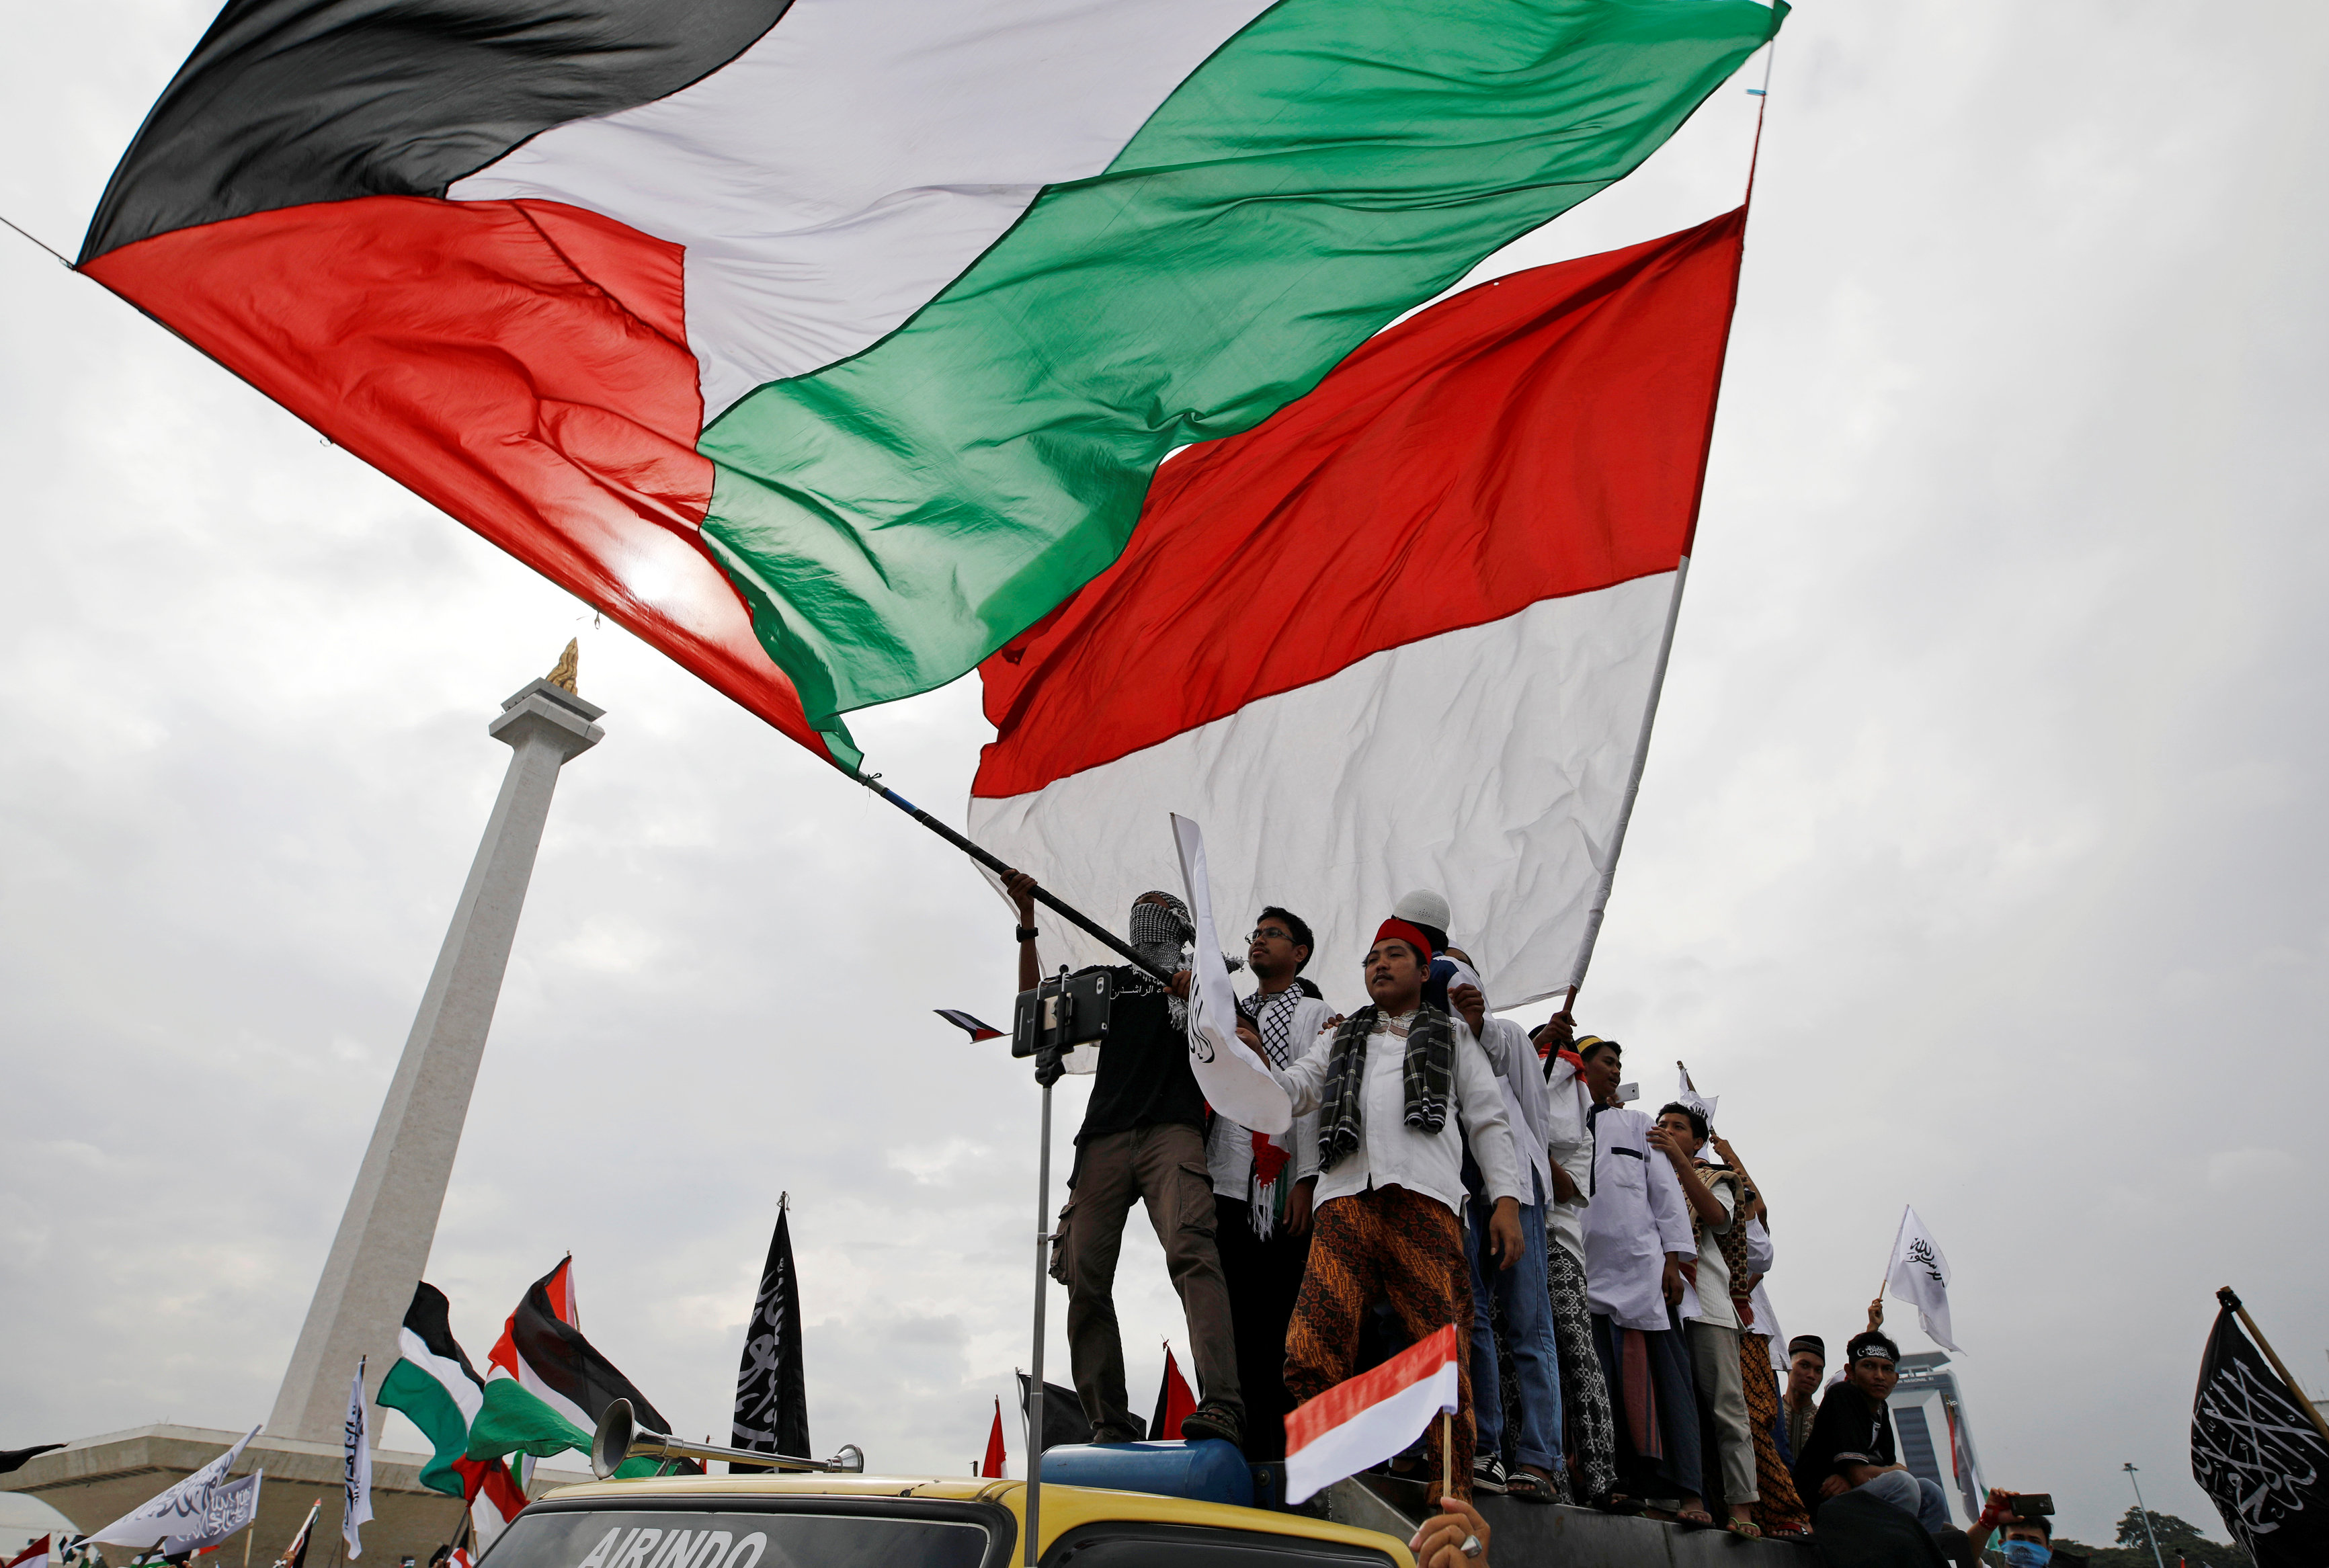 Tens of thousands march in Indonesia to support Palestinans